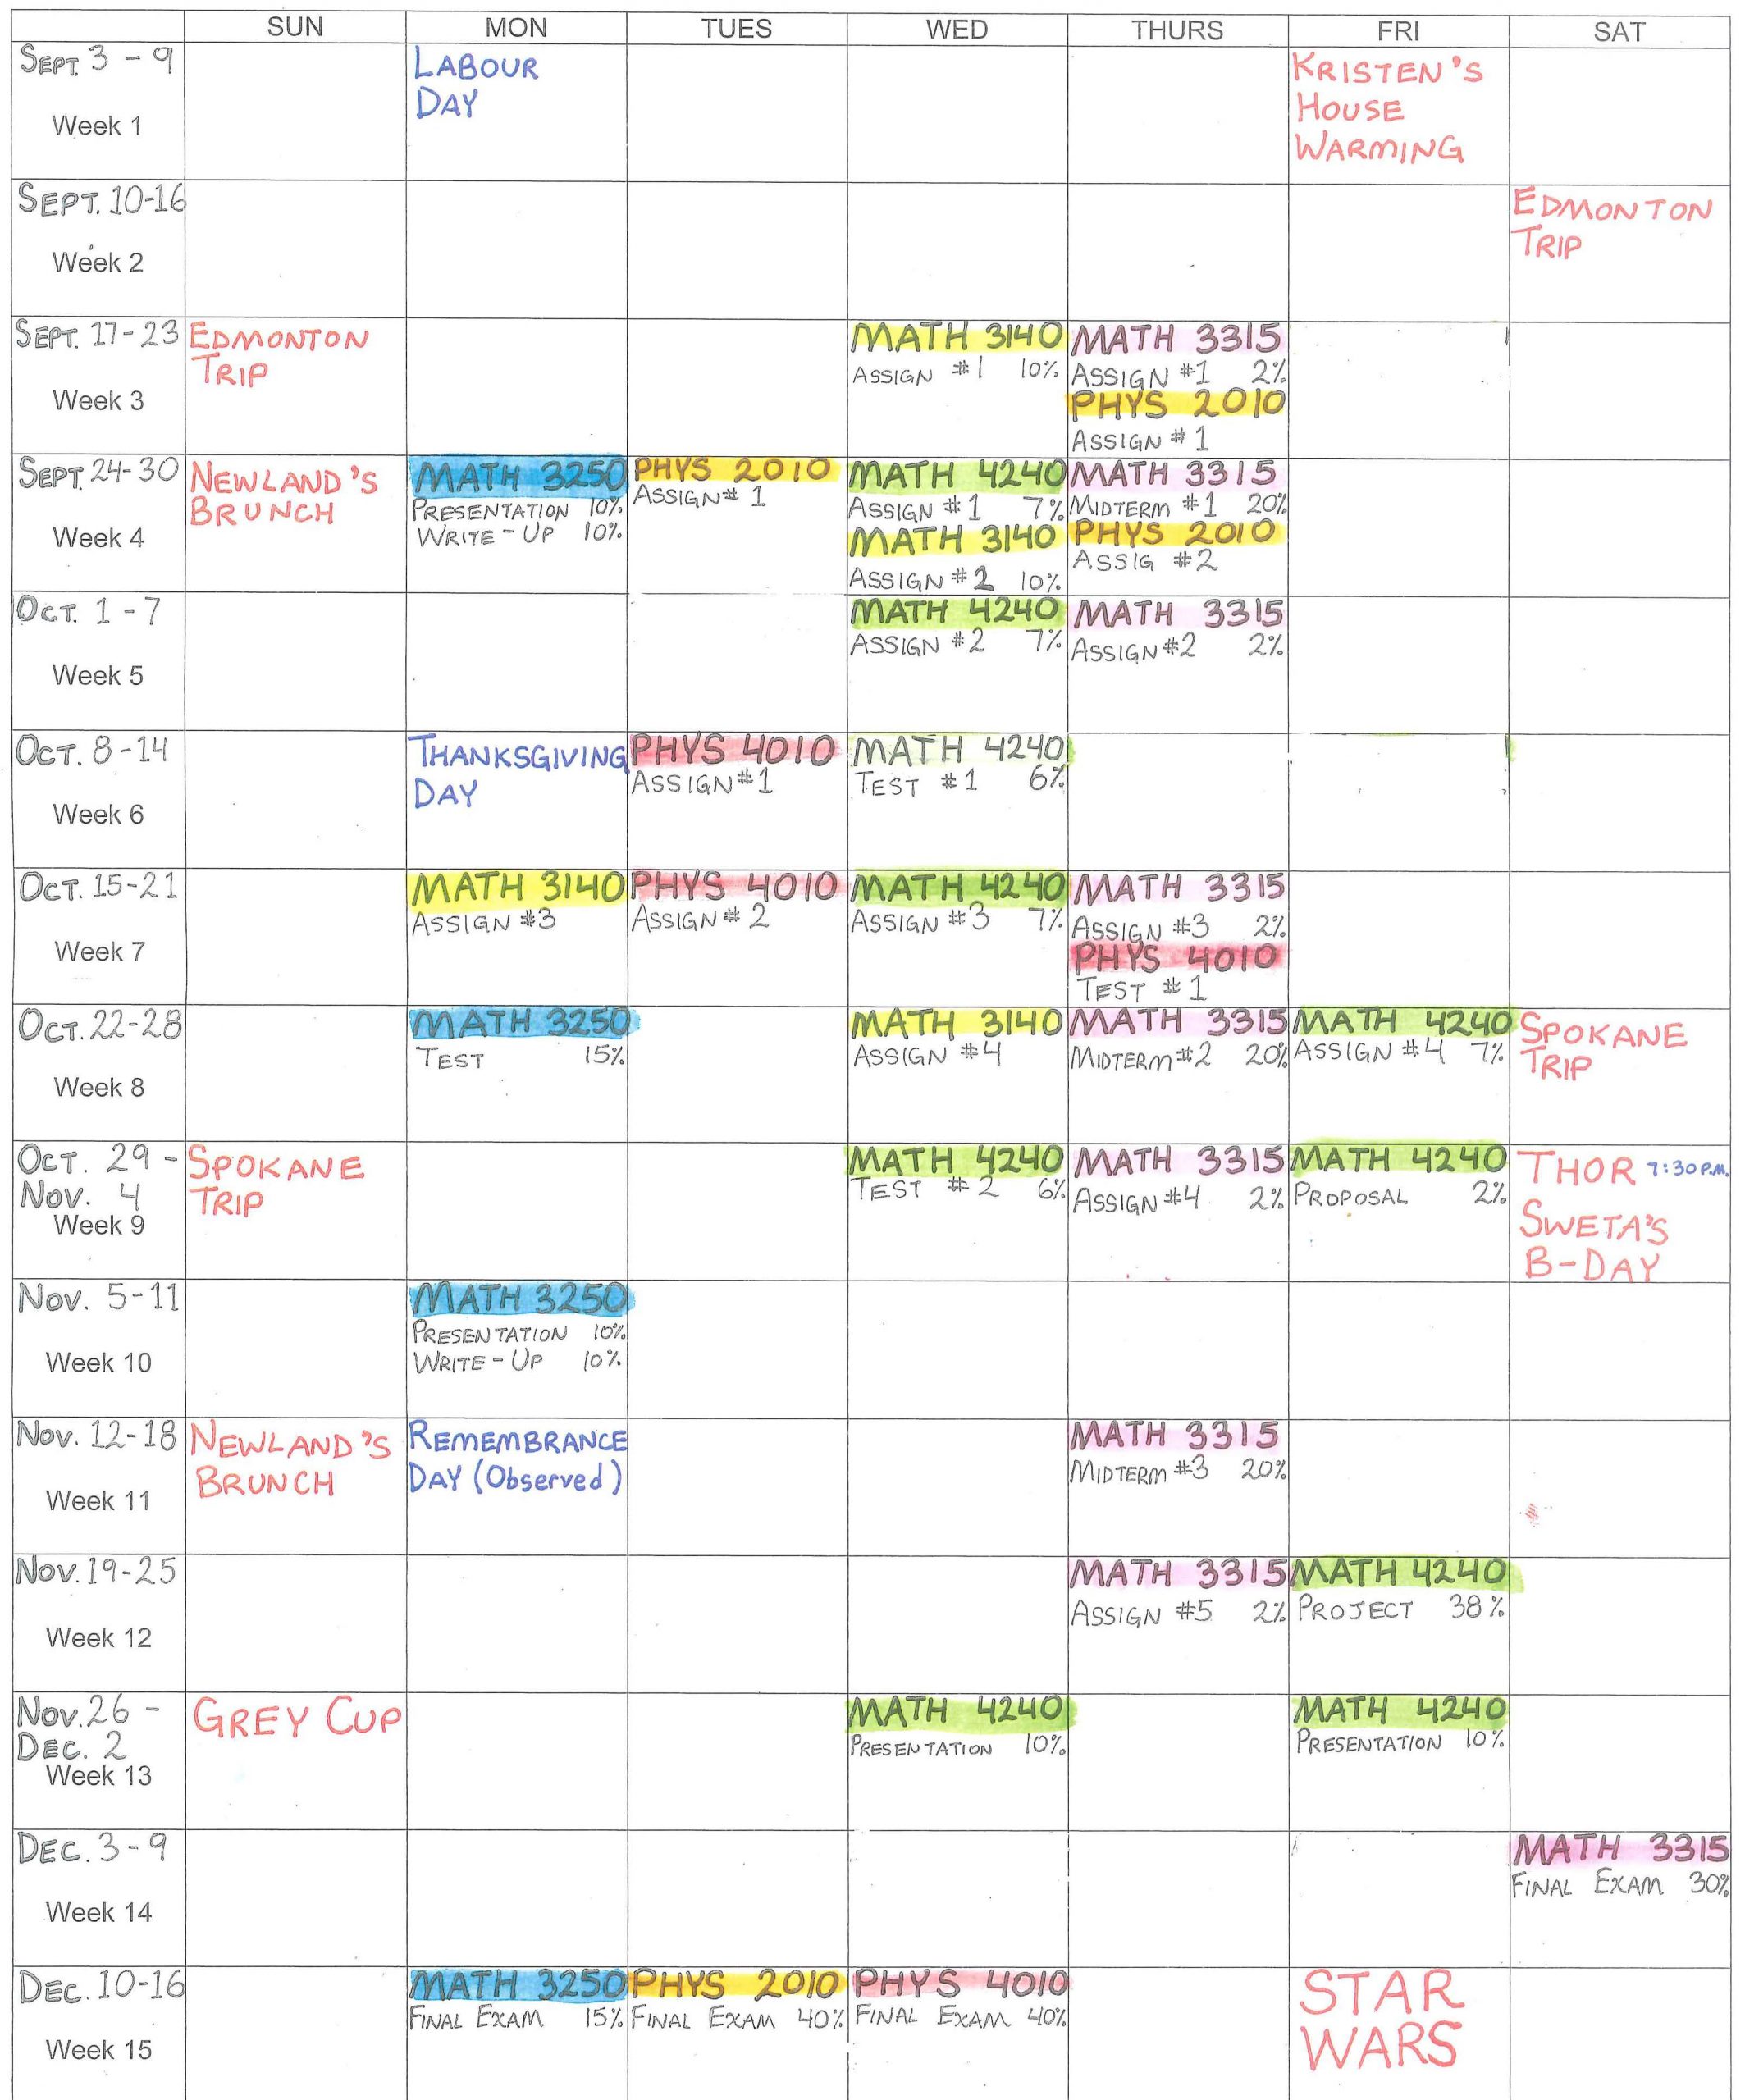 Example Semester Schedule with course class times added in different colours.